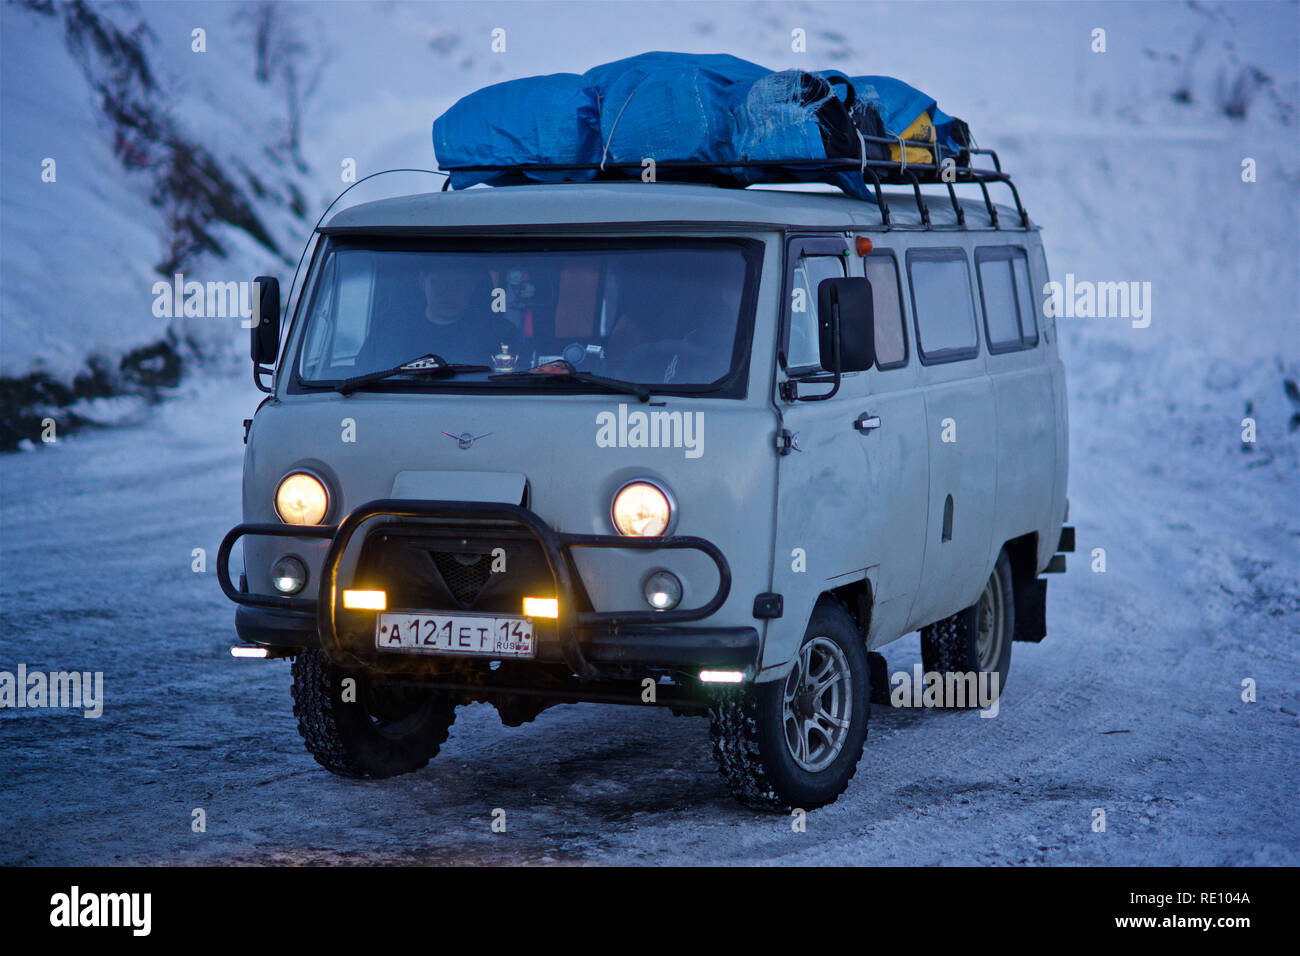 Russian Van High Resolution Stock Photography and Images - Alamy